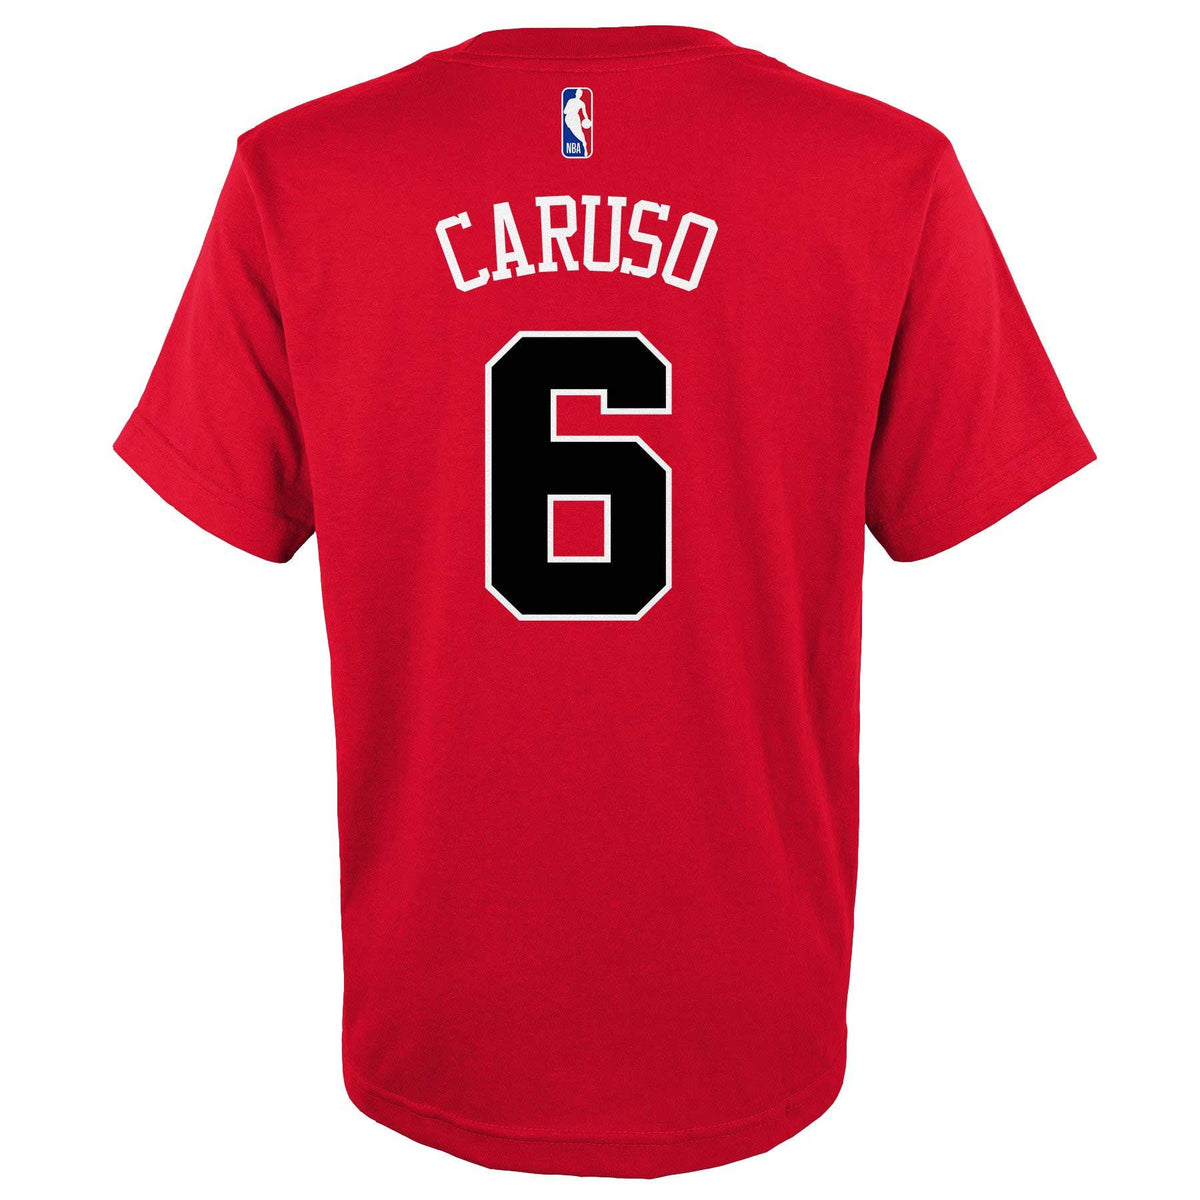 Alex Caruso Chicago Bulls player name & number t-shirt by To-Tee Clothing -  Issuu